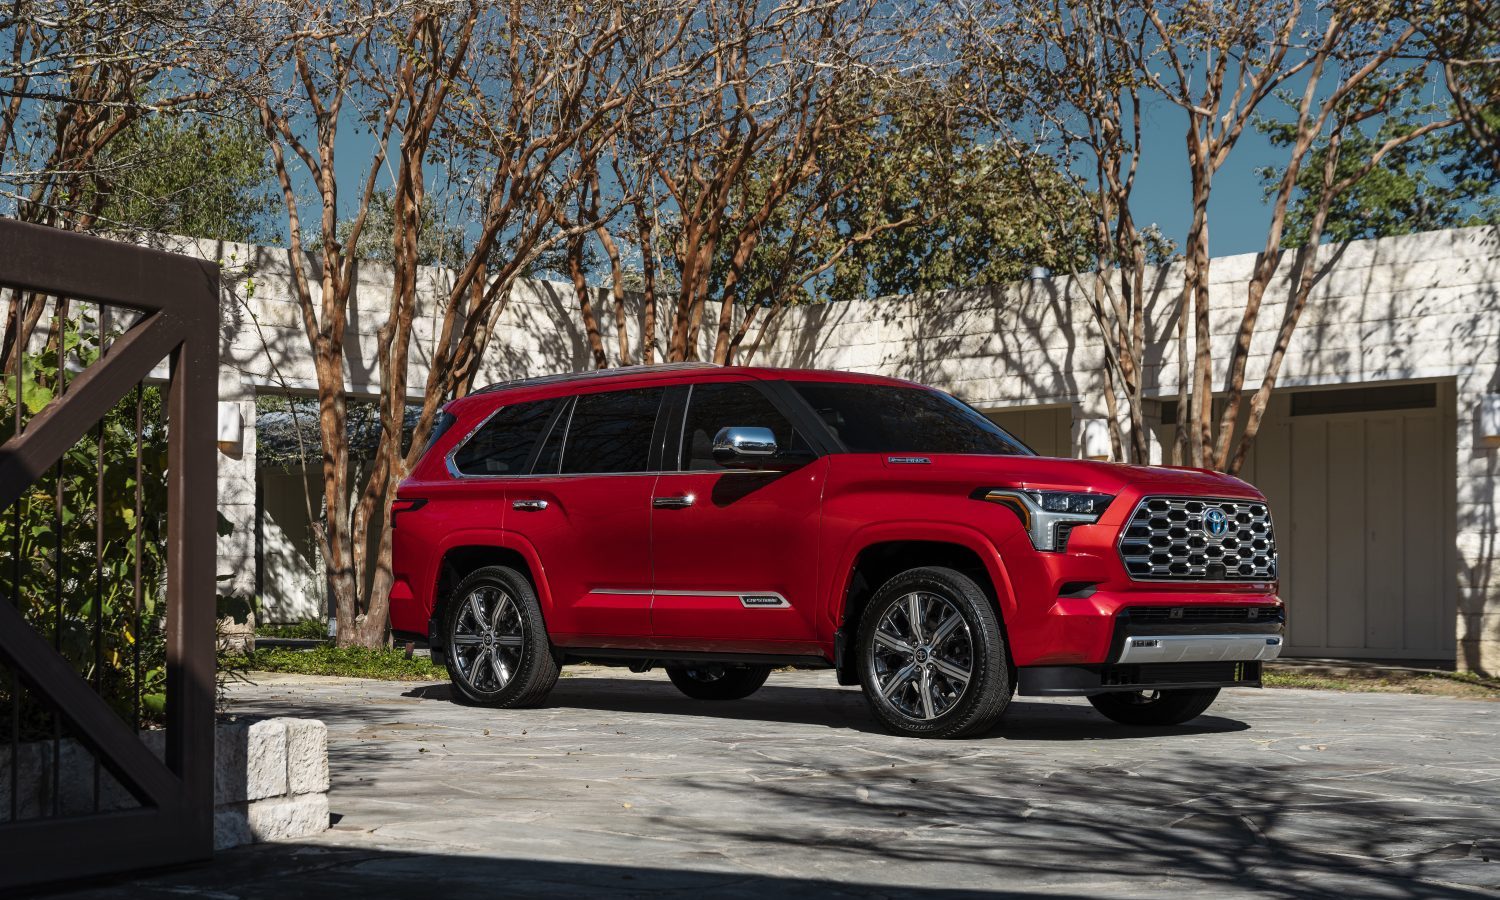 Chicago Auto Show Debuts All-New Sequoia, Features Tundra Capstone, bZ4X  and the Latest Toyota Lineup - Toyota USA Newsroom